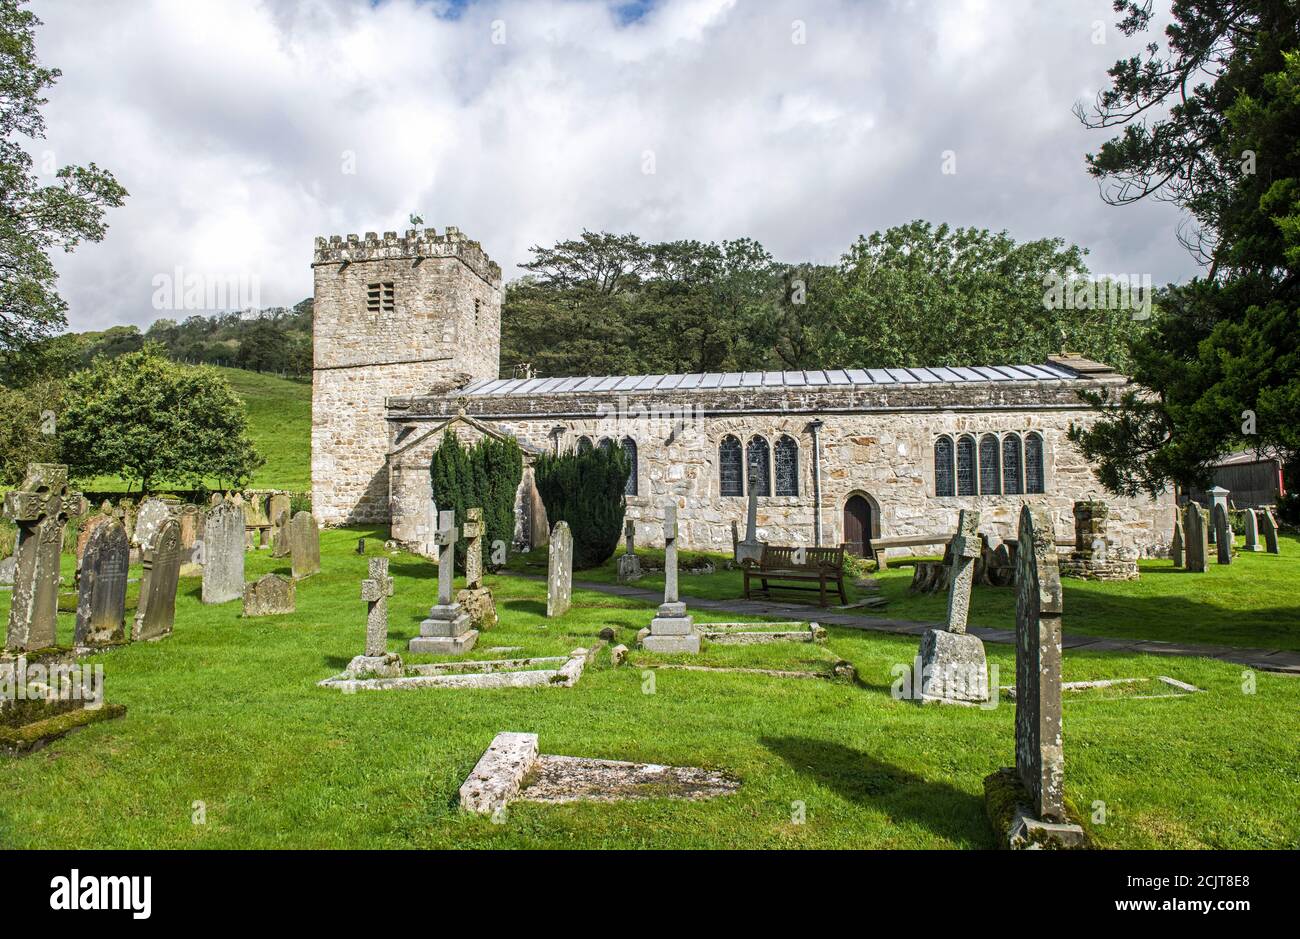 St Michael and all Angels church in Hubberholme in Upper Wharfedale, Yorkshire Dales National Park. Stock Photo